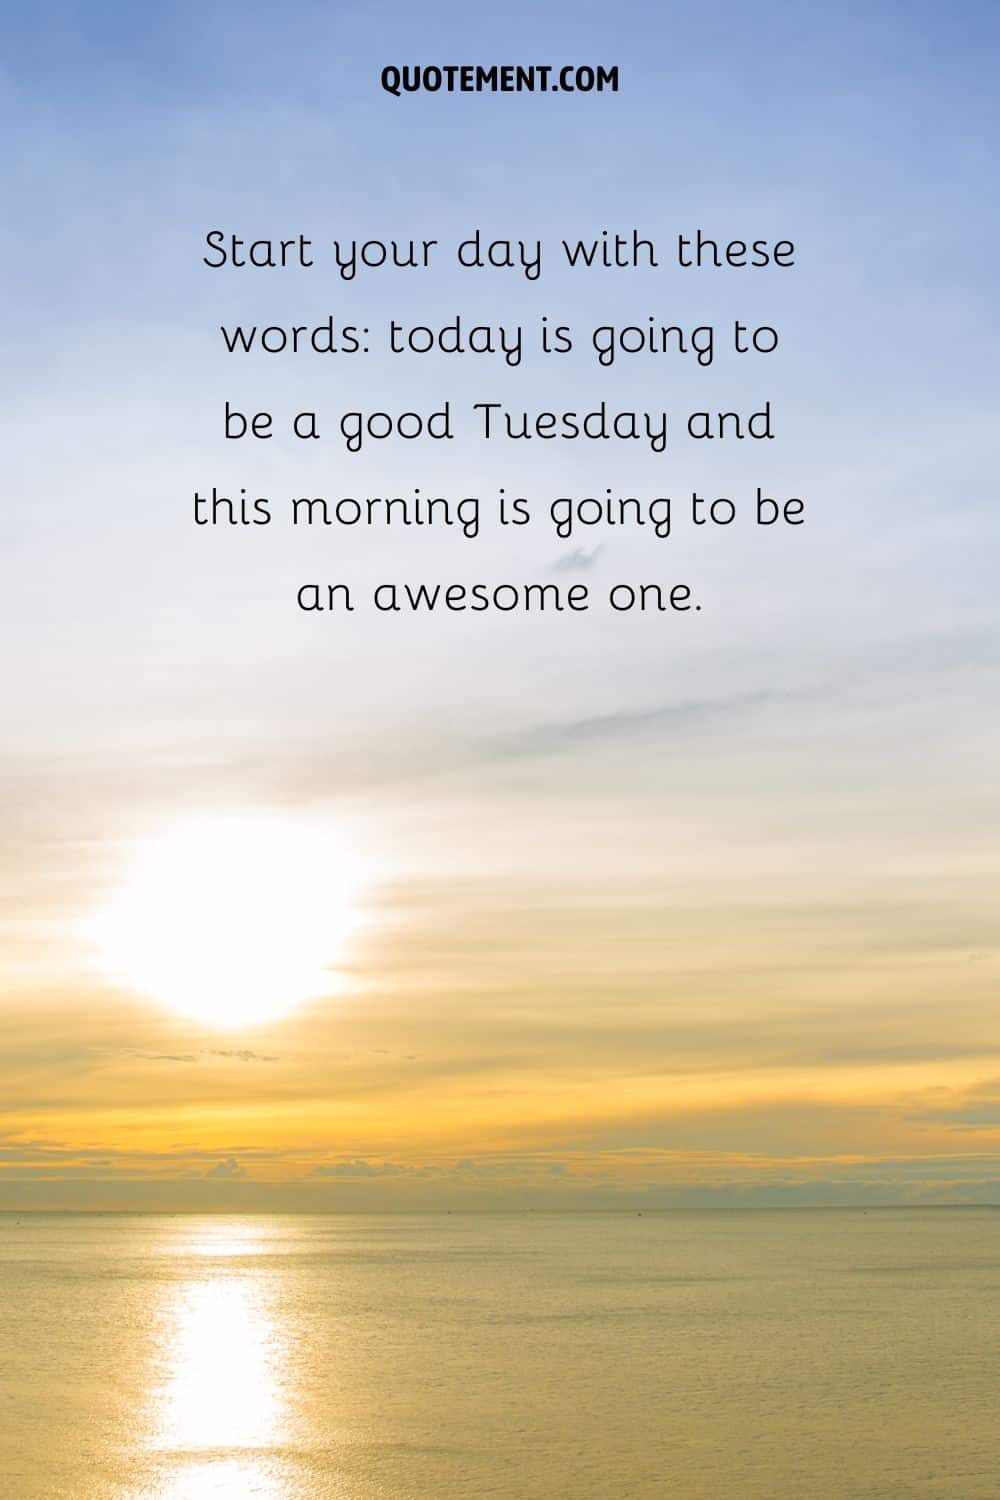 “Start your day with these words today is going to be a good Tuesday and this morning is going to be an awesome one.” — Unknown